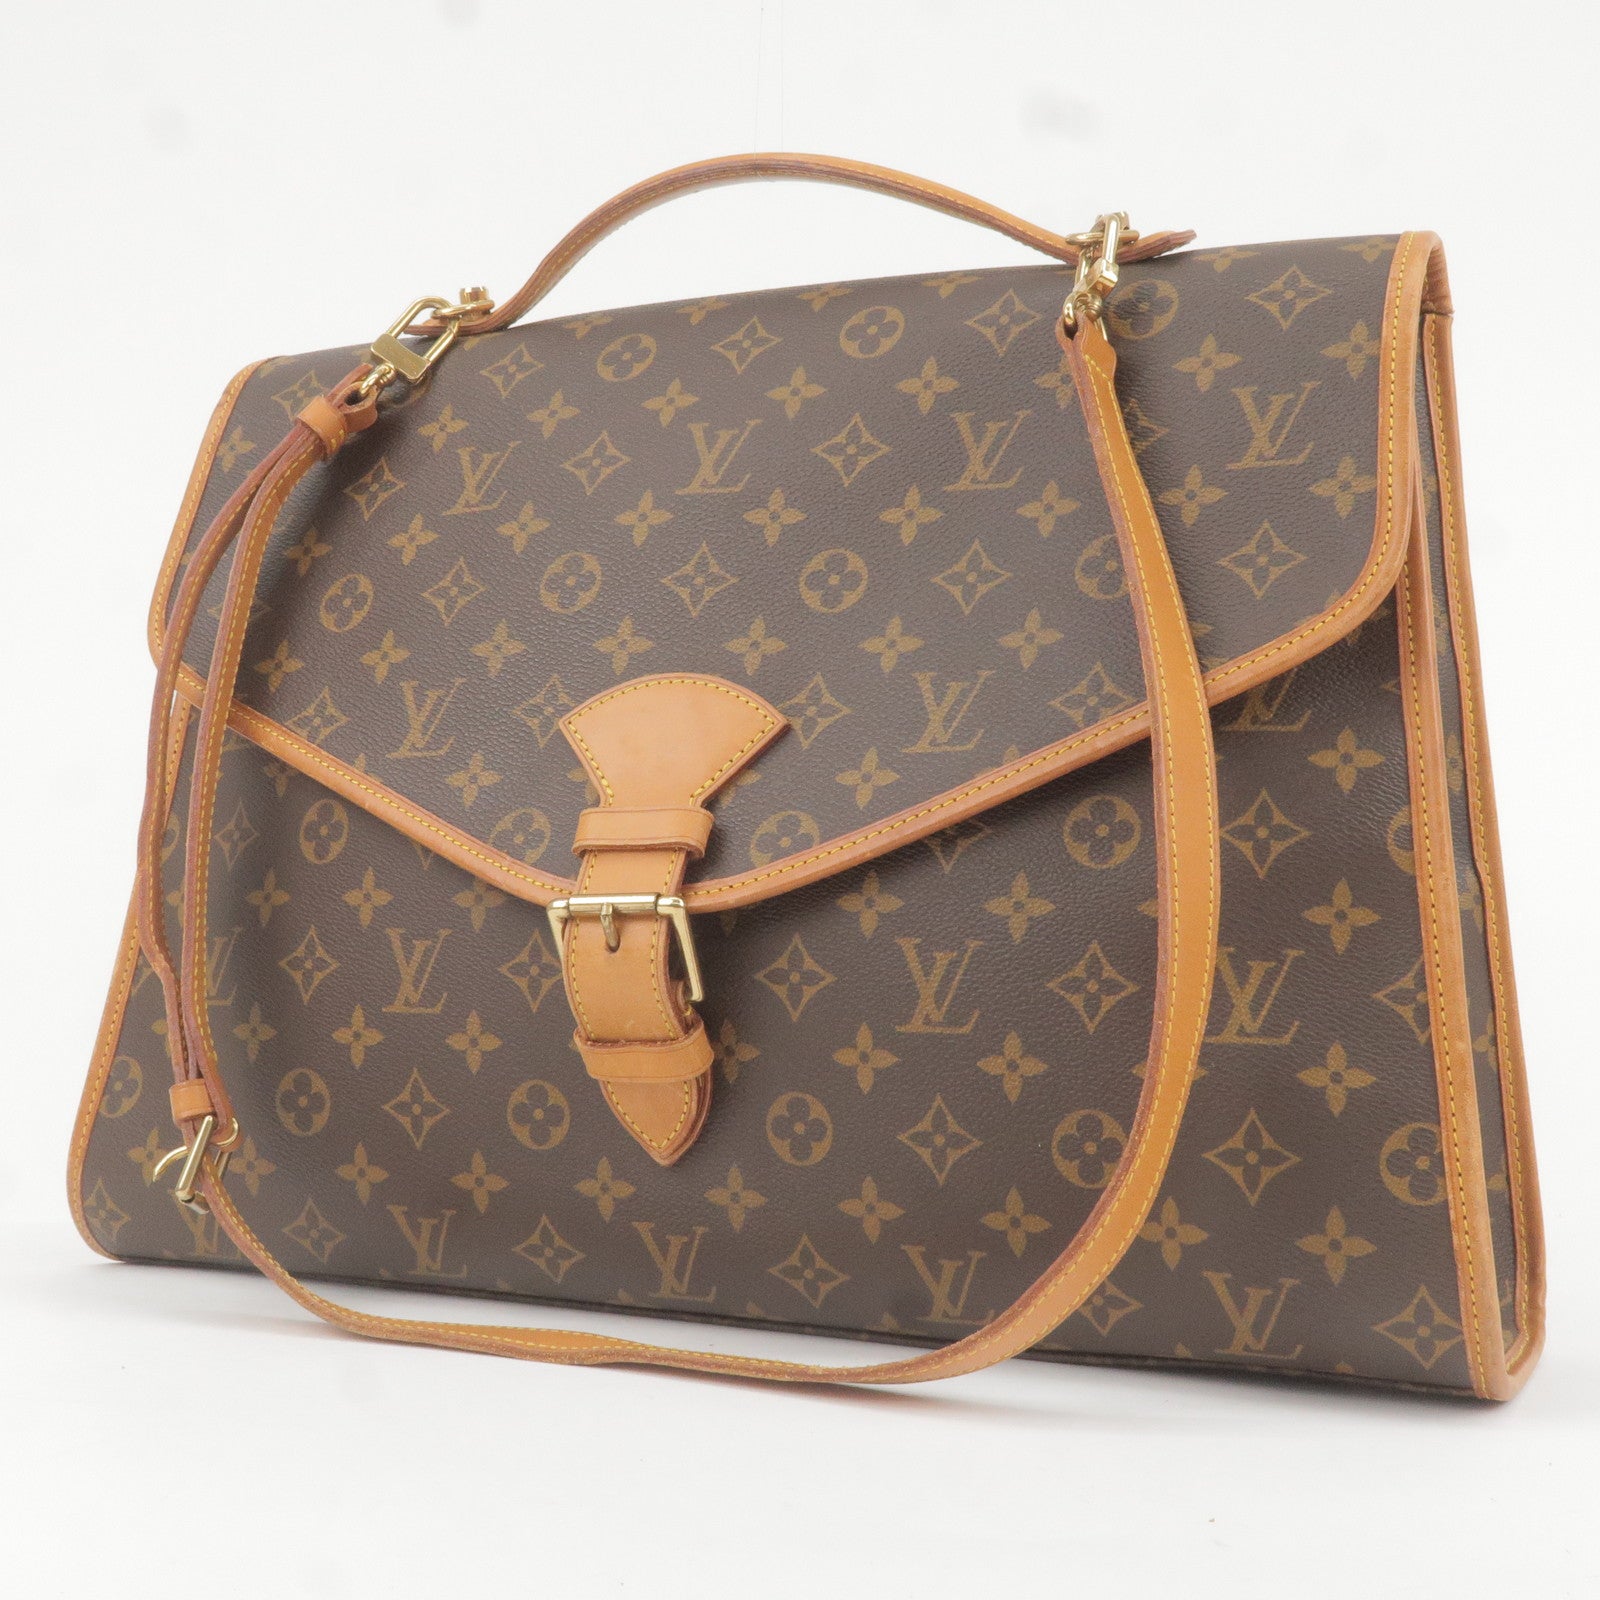 Unboxing My LOUIS VUITTON SPEEDY BANDOULIERE 25 Wild At Heart